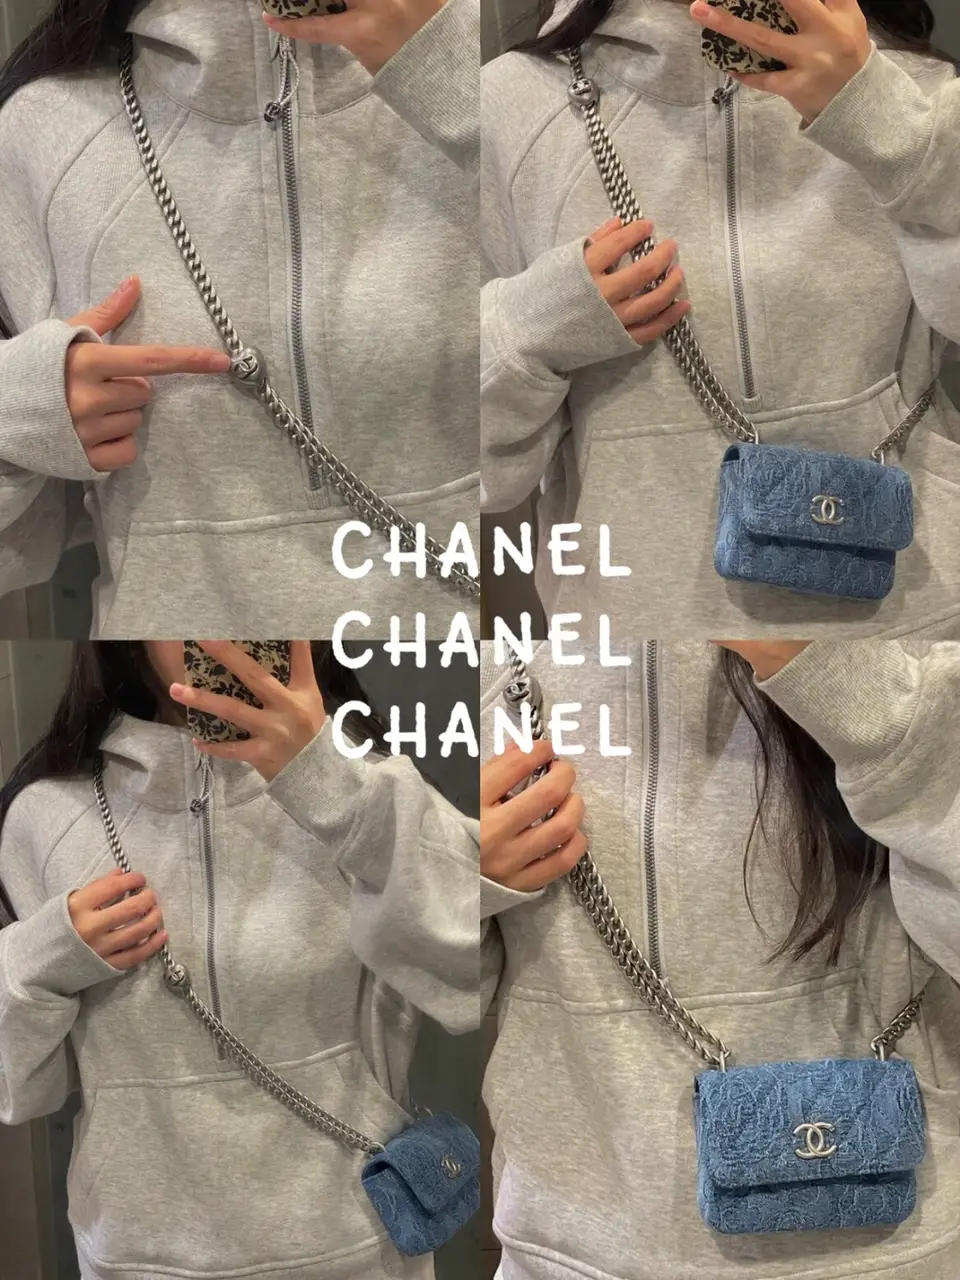 Vintage Vibes w/ Chanel's Blue Denim Bag👌, Gallery posted by Jenny Cheung